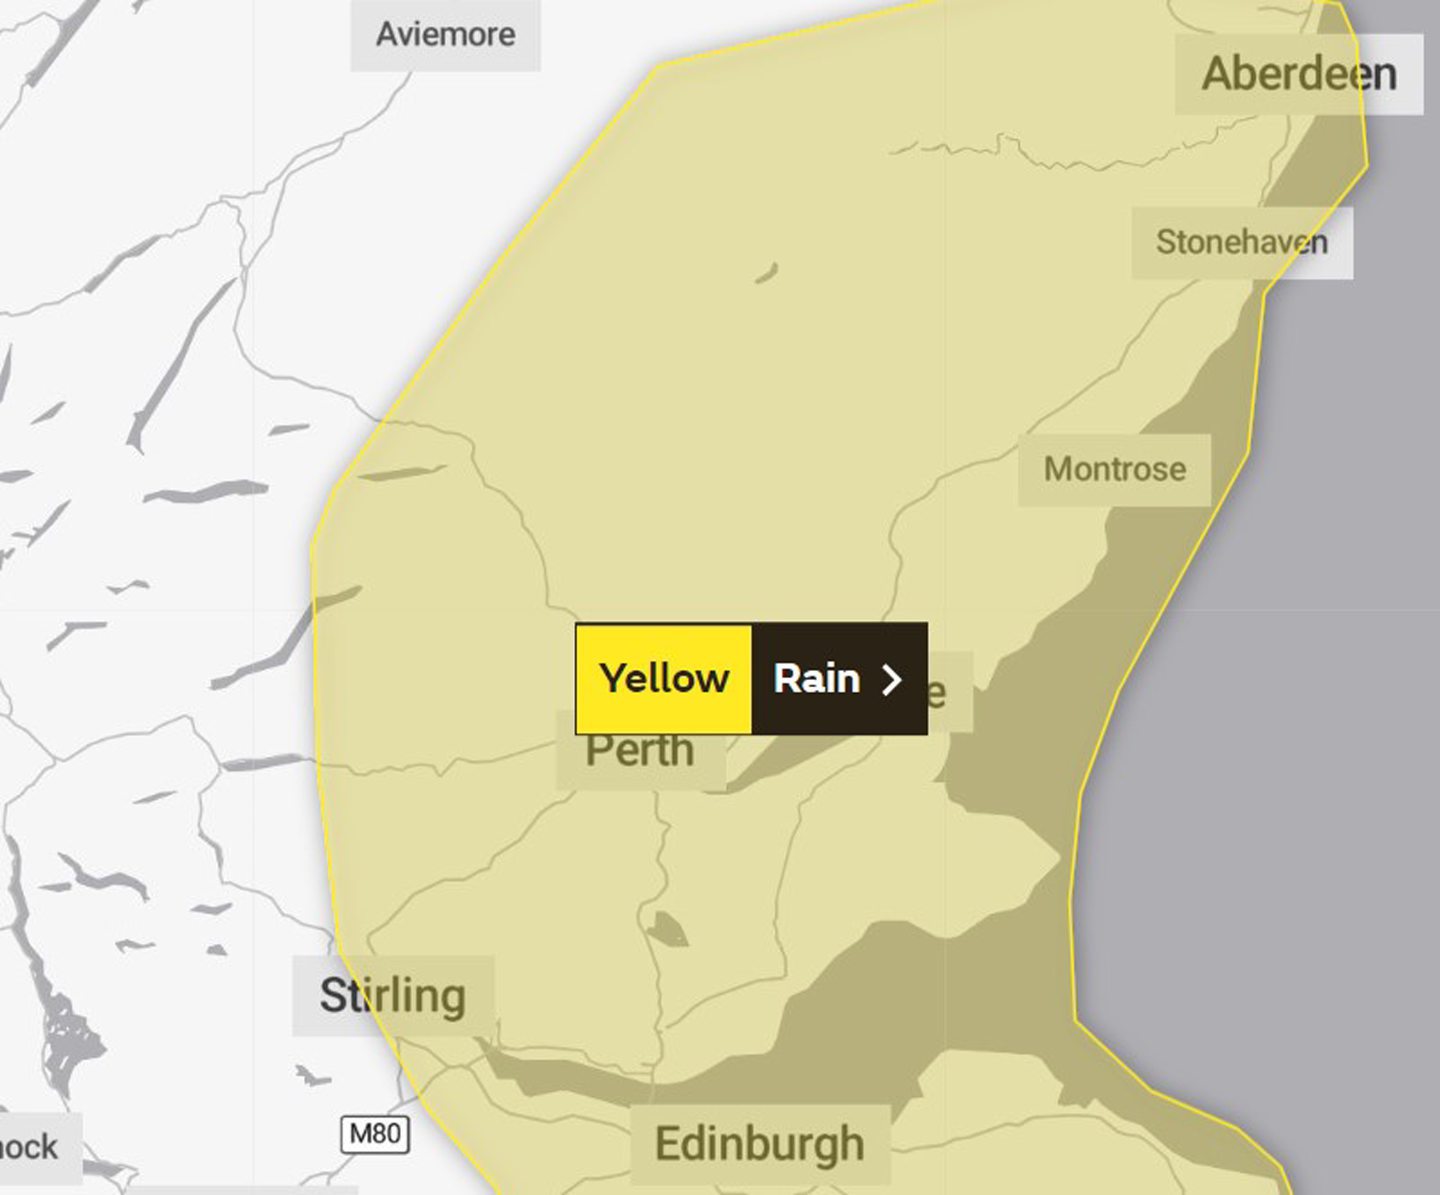 Met Office warning for rain covering Tayside and Fife on October 27 2023.